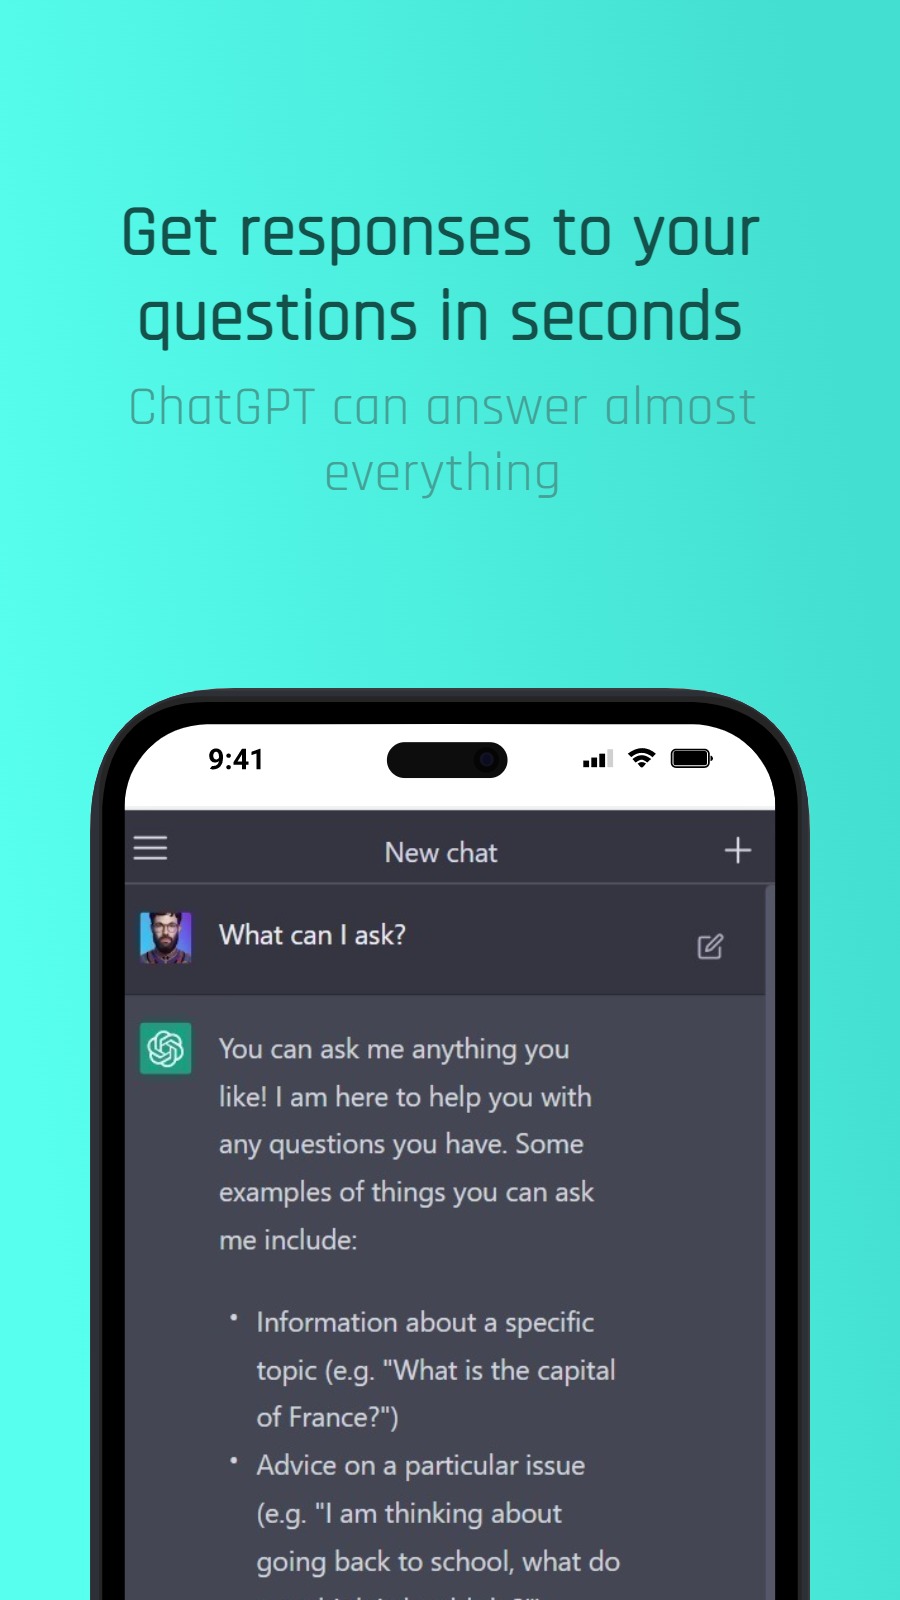 Get responses to your questions in seconds - ChatGPT can answer almost everything